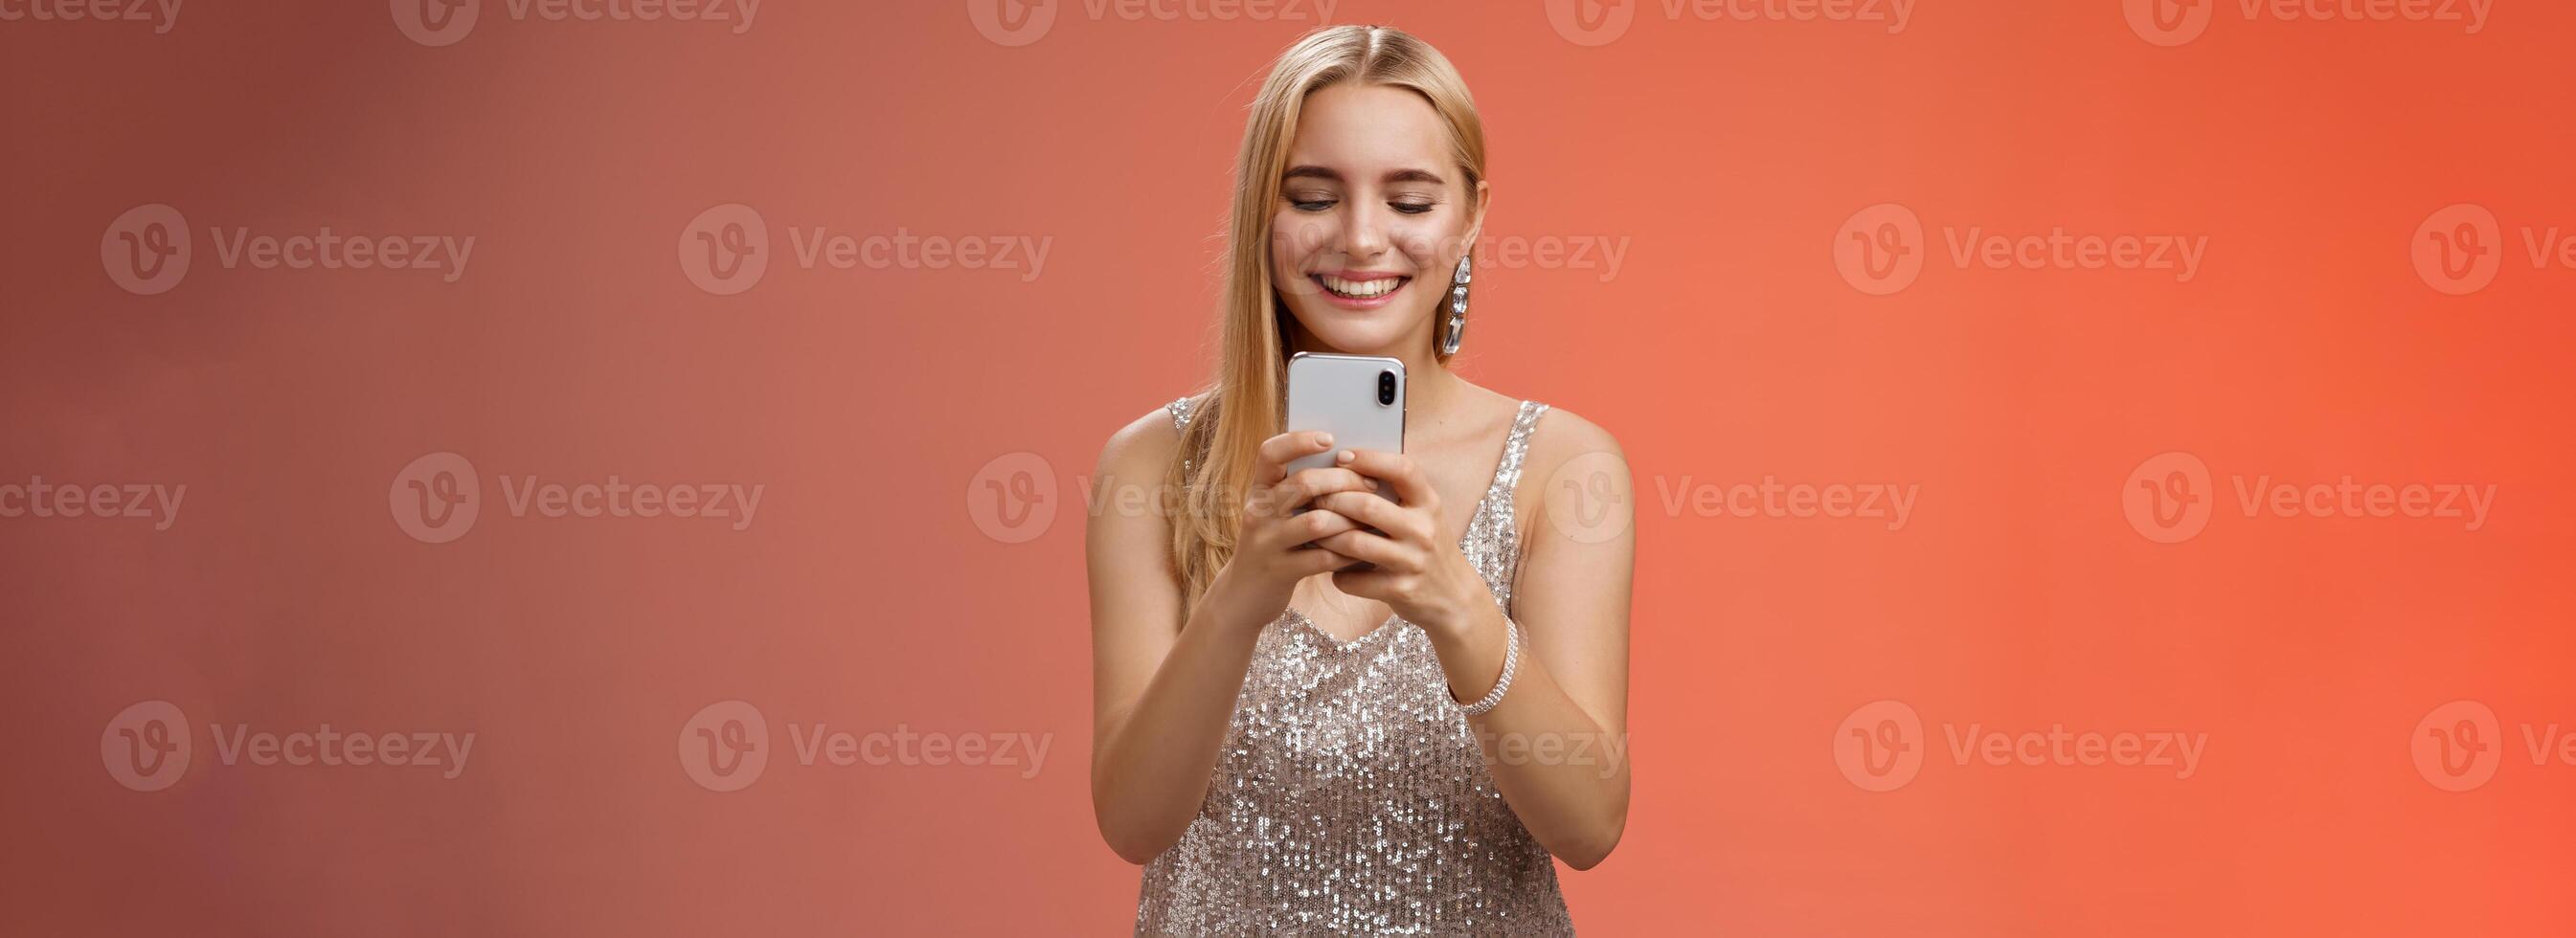 Delighted tender glamour blond woman in silver stylish glittering dress brilliand earrings holding smartphone taking photo friend capture moment celebration nightclub, red background smiling